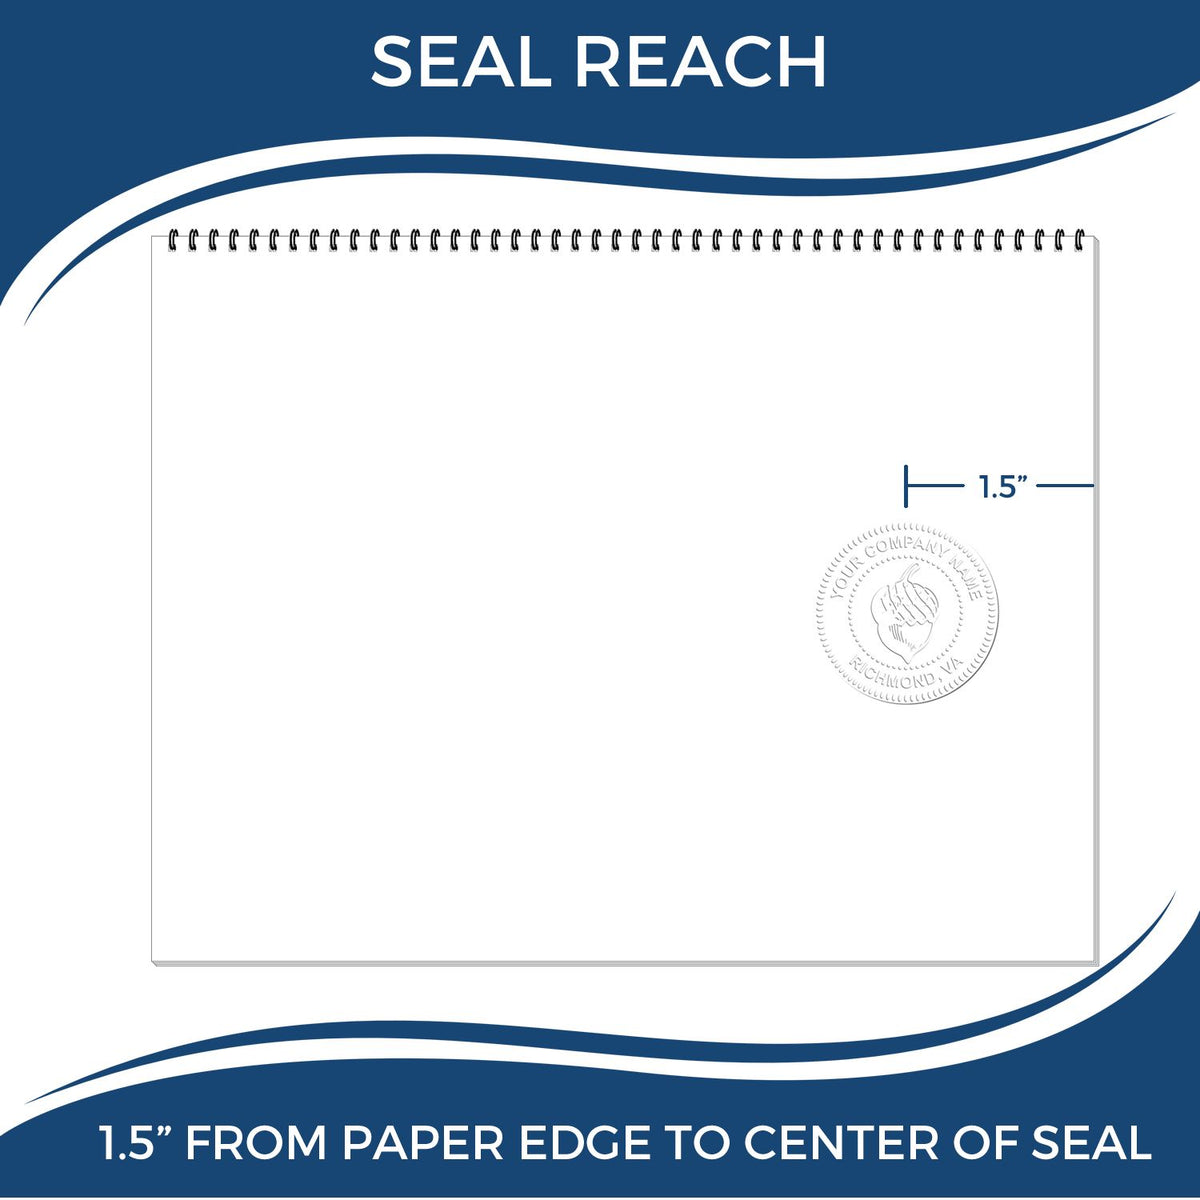 An infographic showing the seal reach which is represented by a ruler and a miniature seal image of the Delaware Engineer Desk Seal